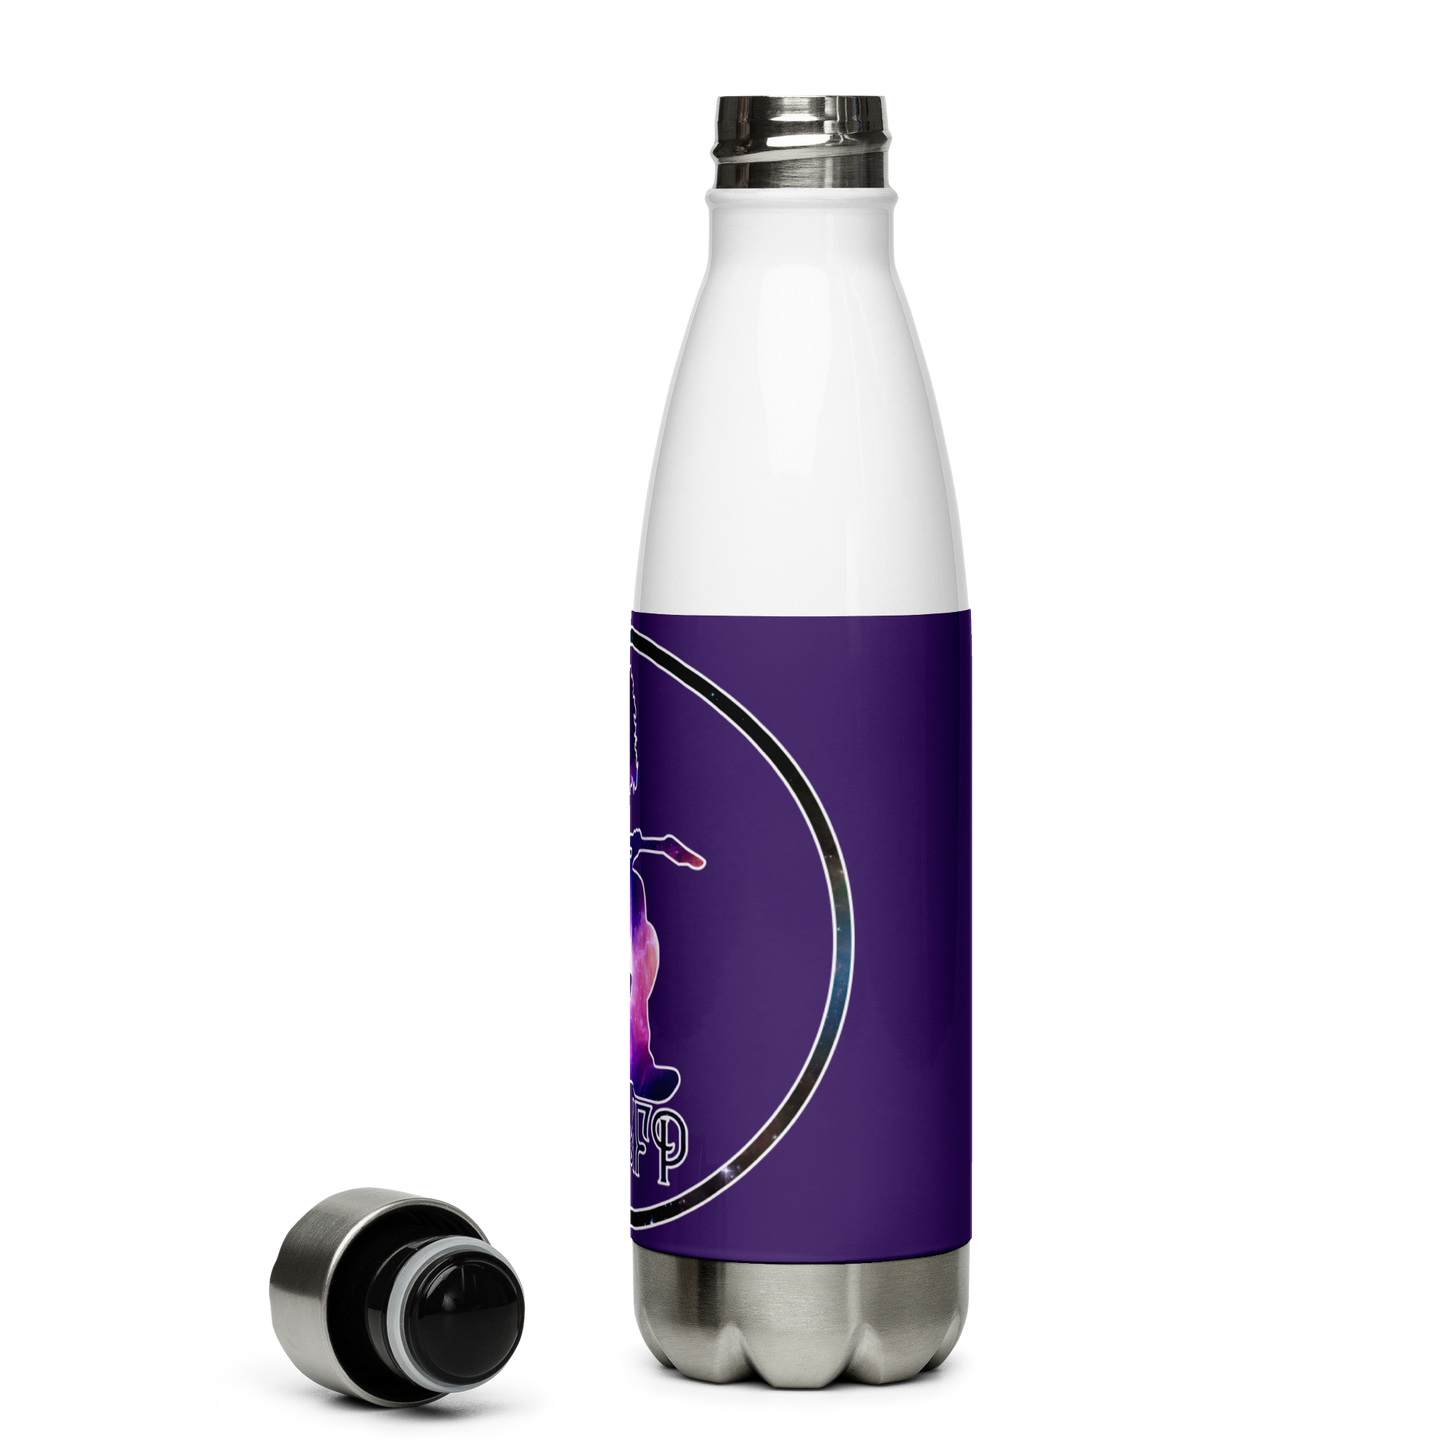 Houser WSMFP Space Stainless Steel Water Bottle 17oz | Printed Graphics